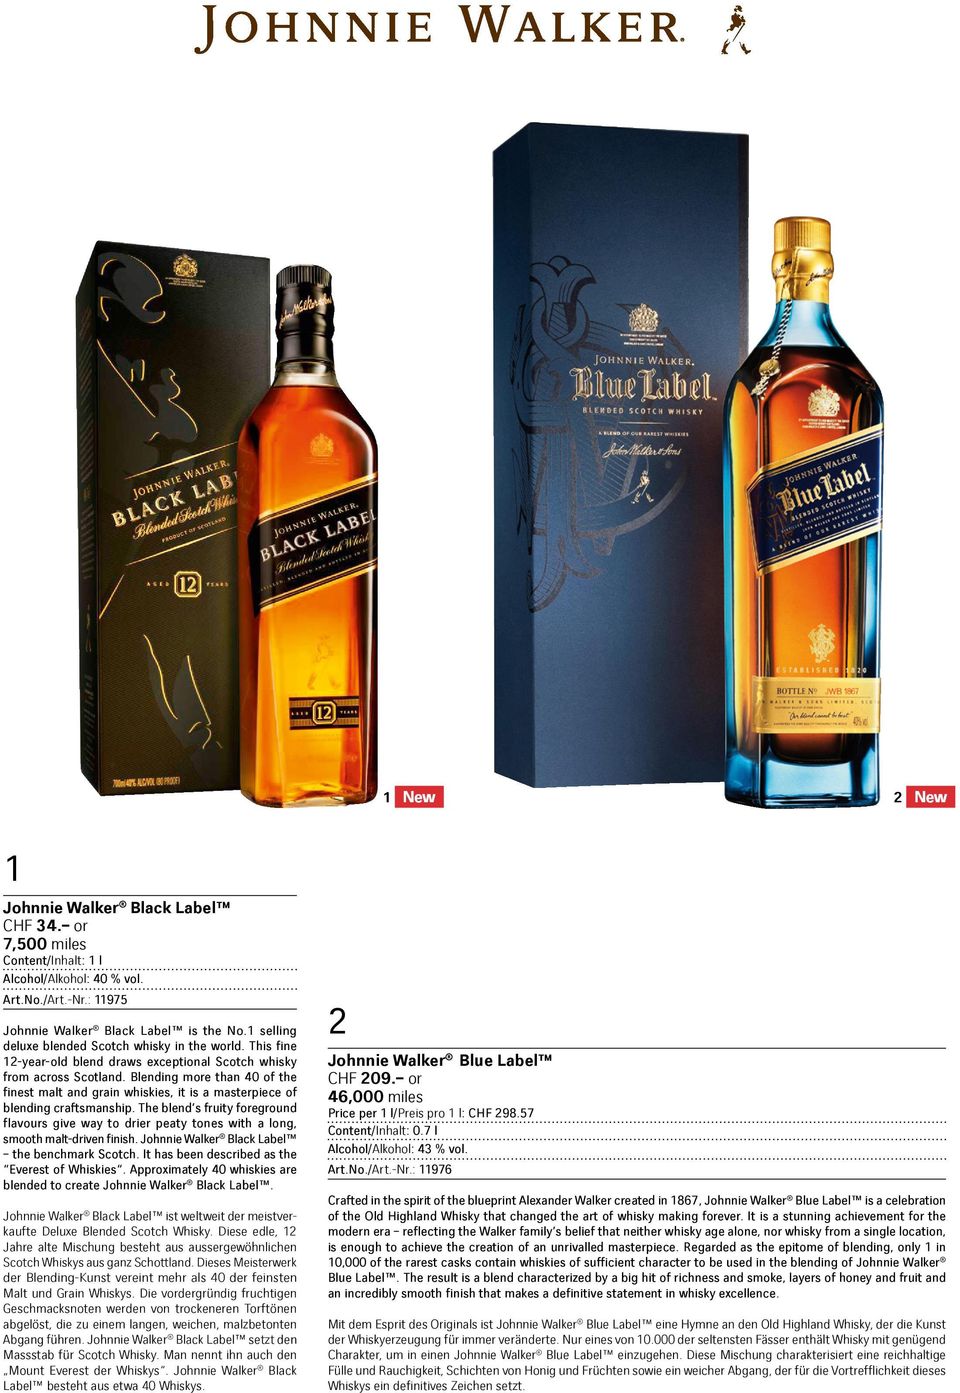 The blend s fruity foreground flavours give way to drier peaty tones with a long, smooth malt-driven finish. Johnnie Walker Black Label the benchmark Scotch.